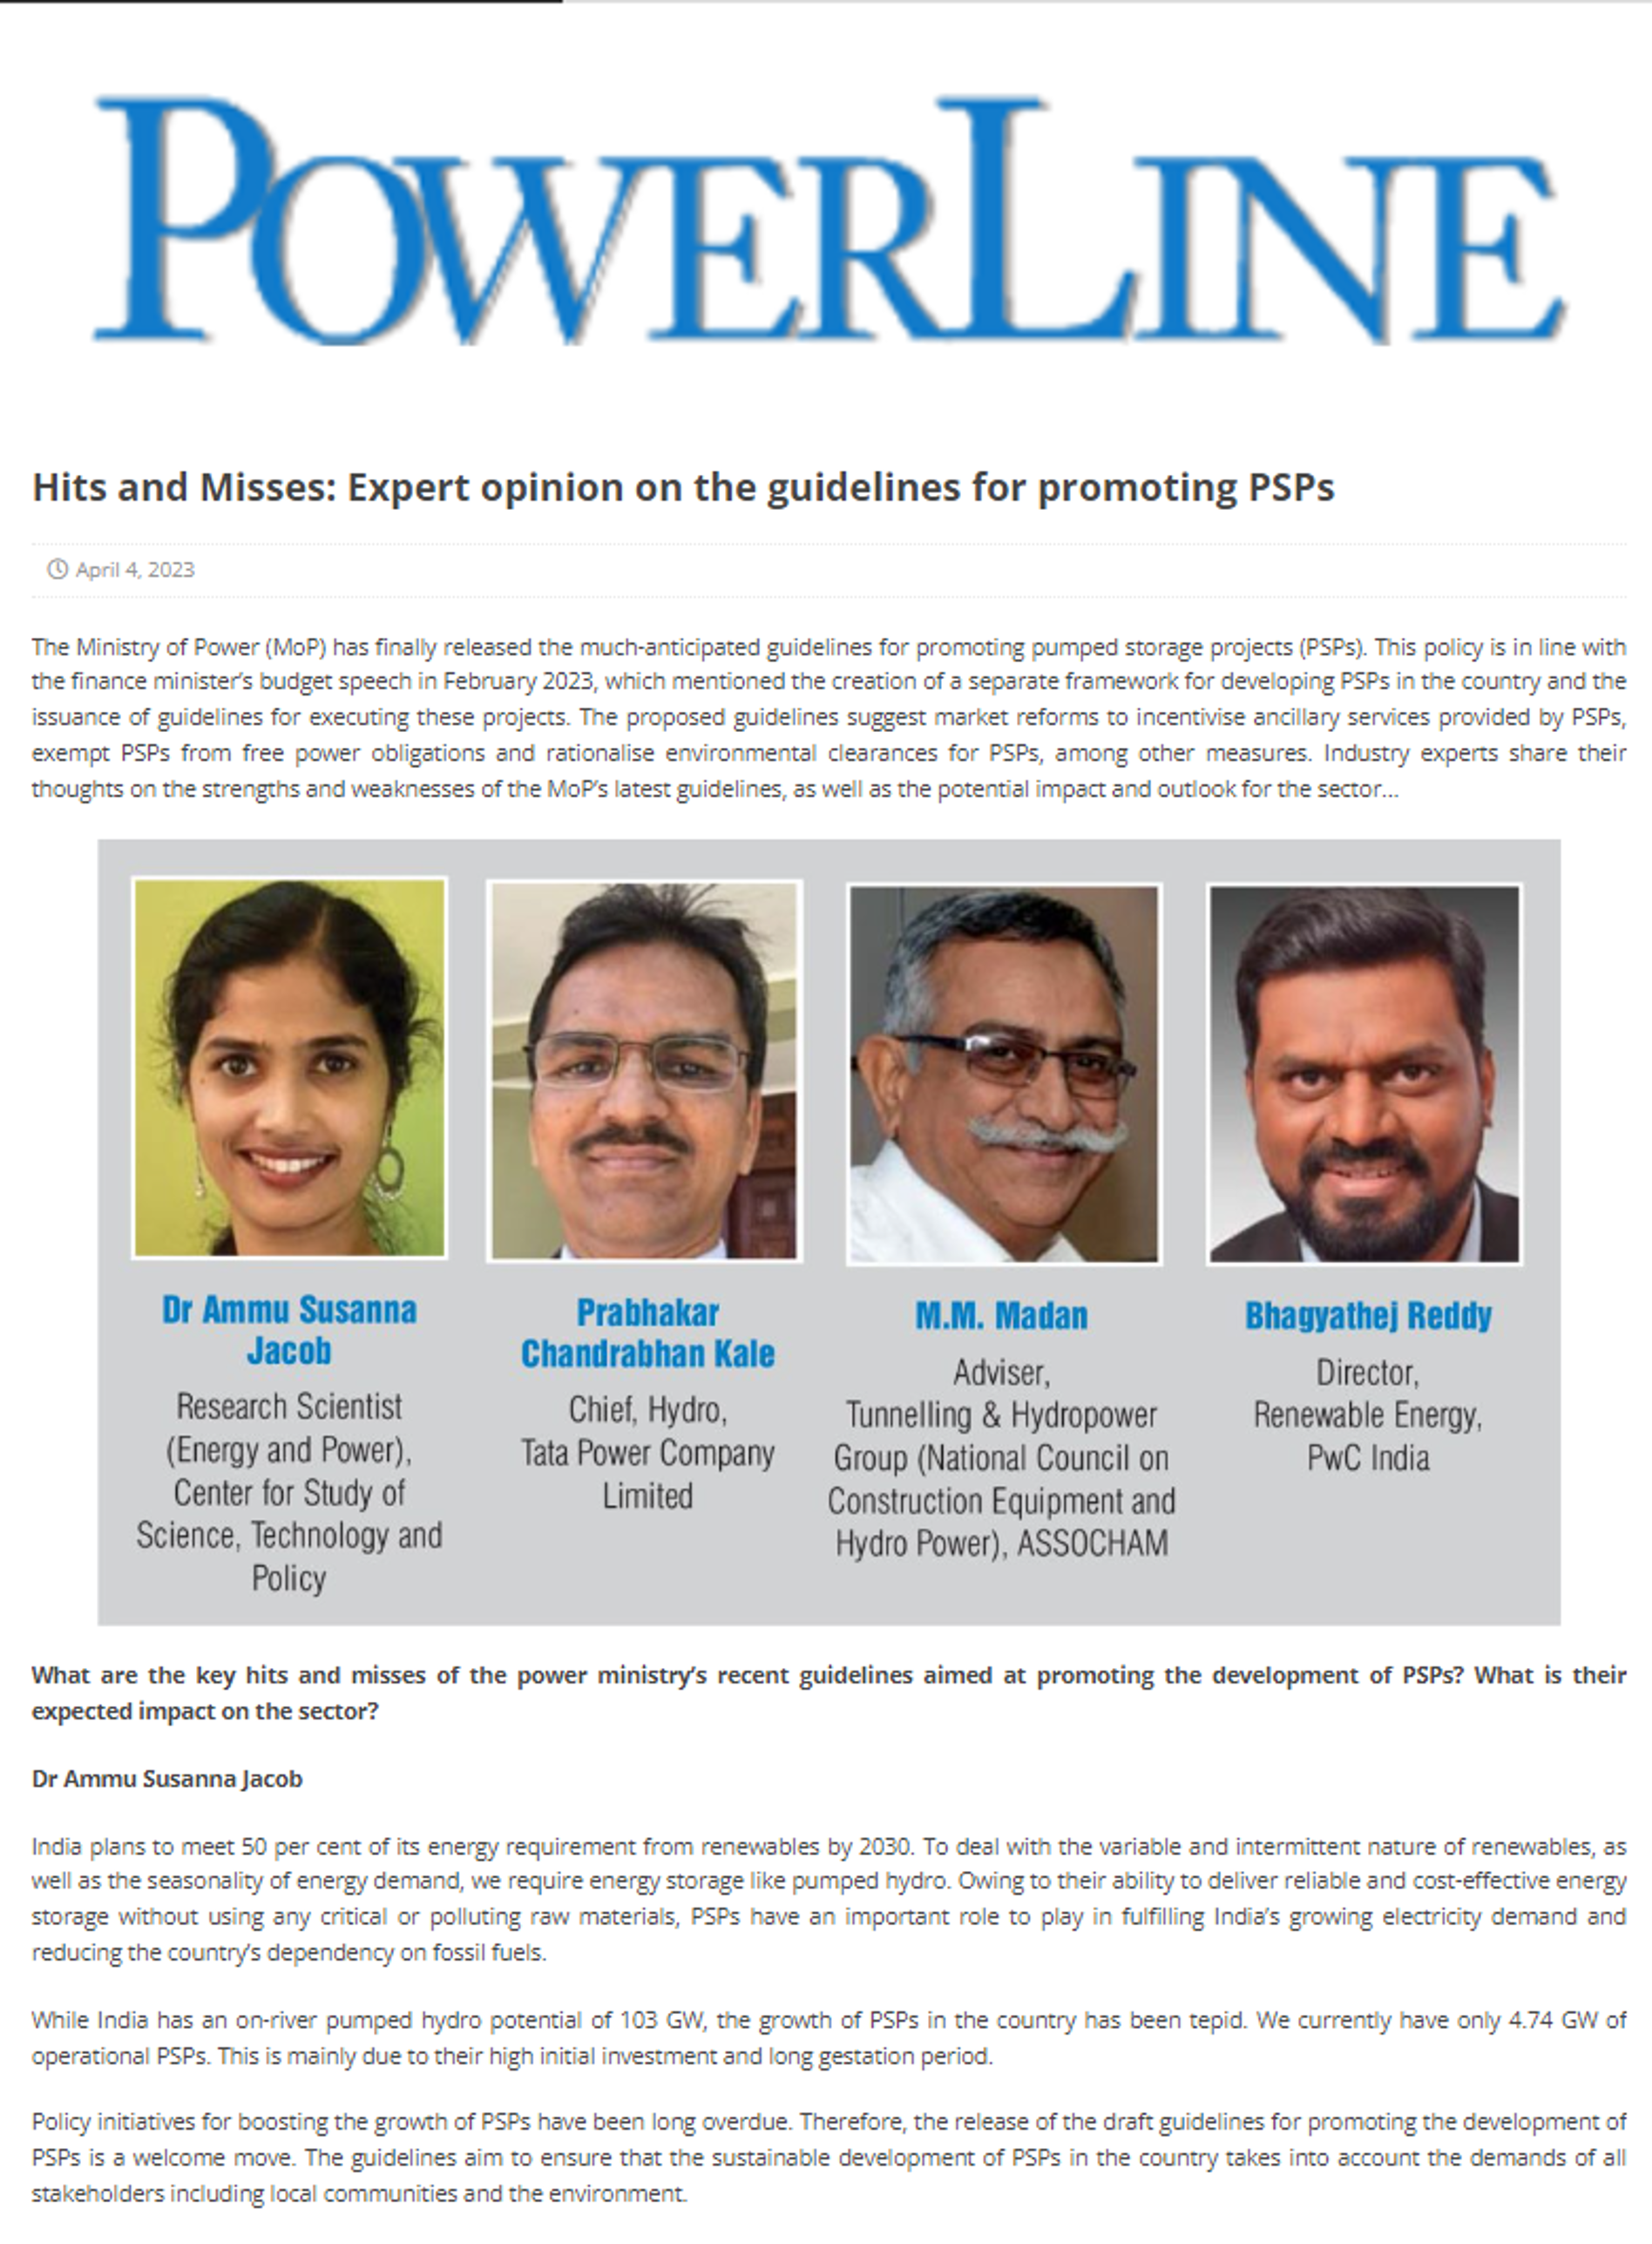 Dr Ammu Susanna Jacob’s perspectives on pumped storage projects featured in Powerline